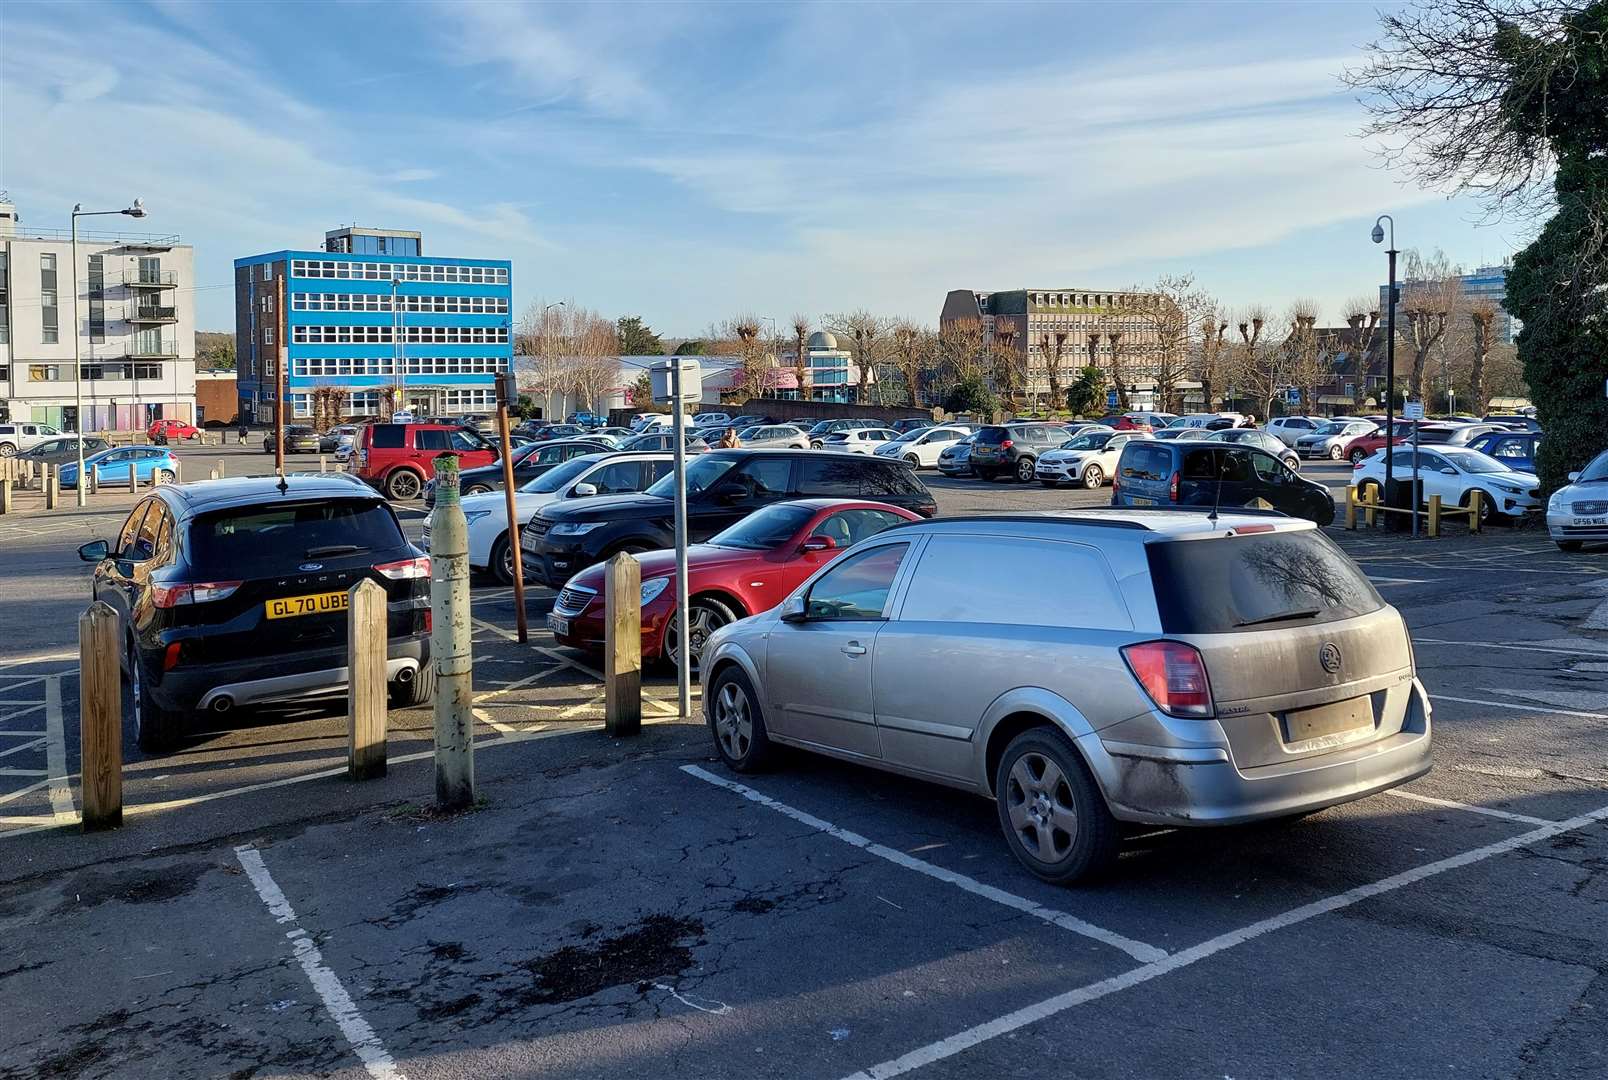 The Vicarage Lane car park is one of the busiest in Ashford, featuring 185 spaces